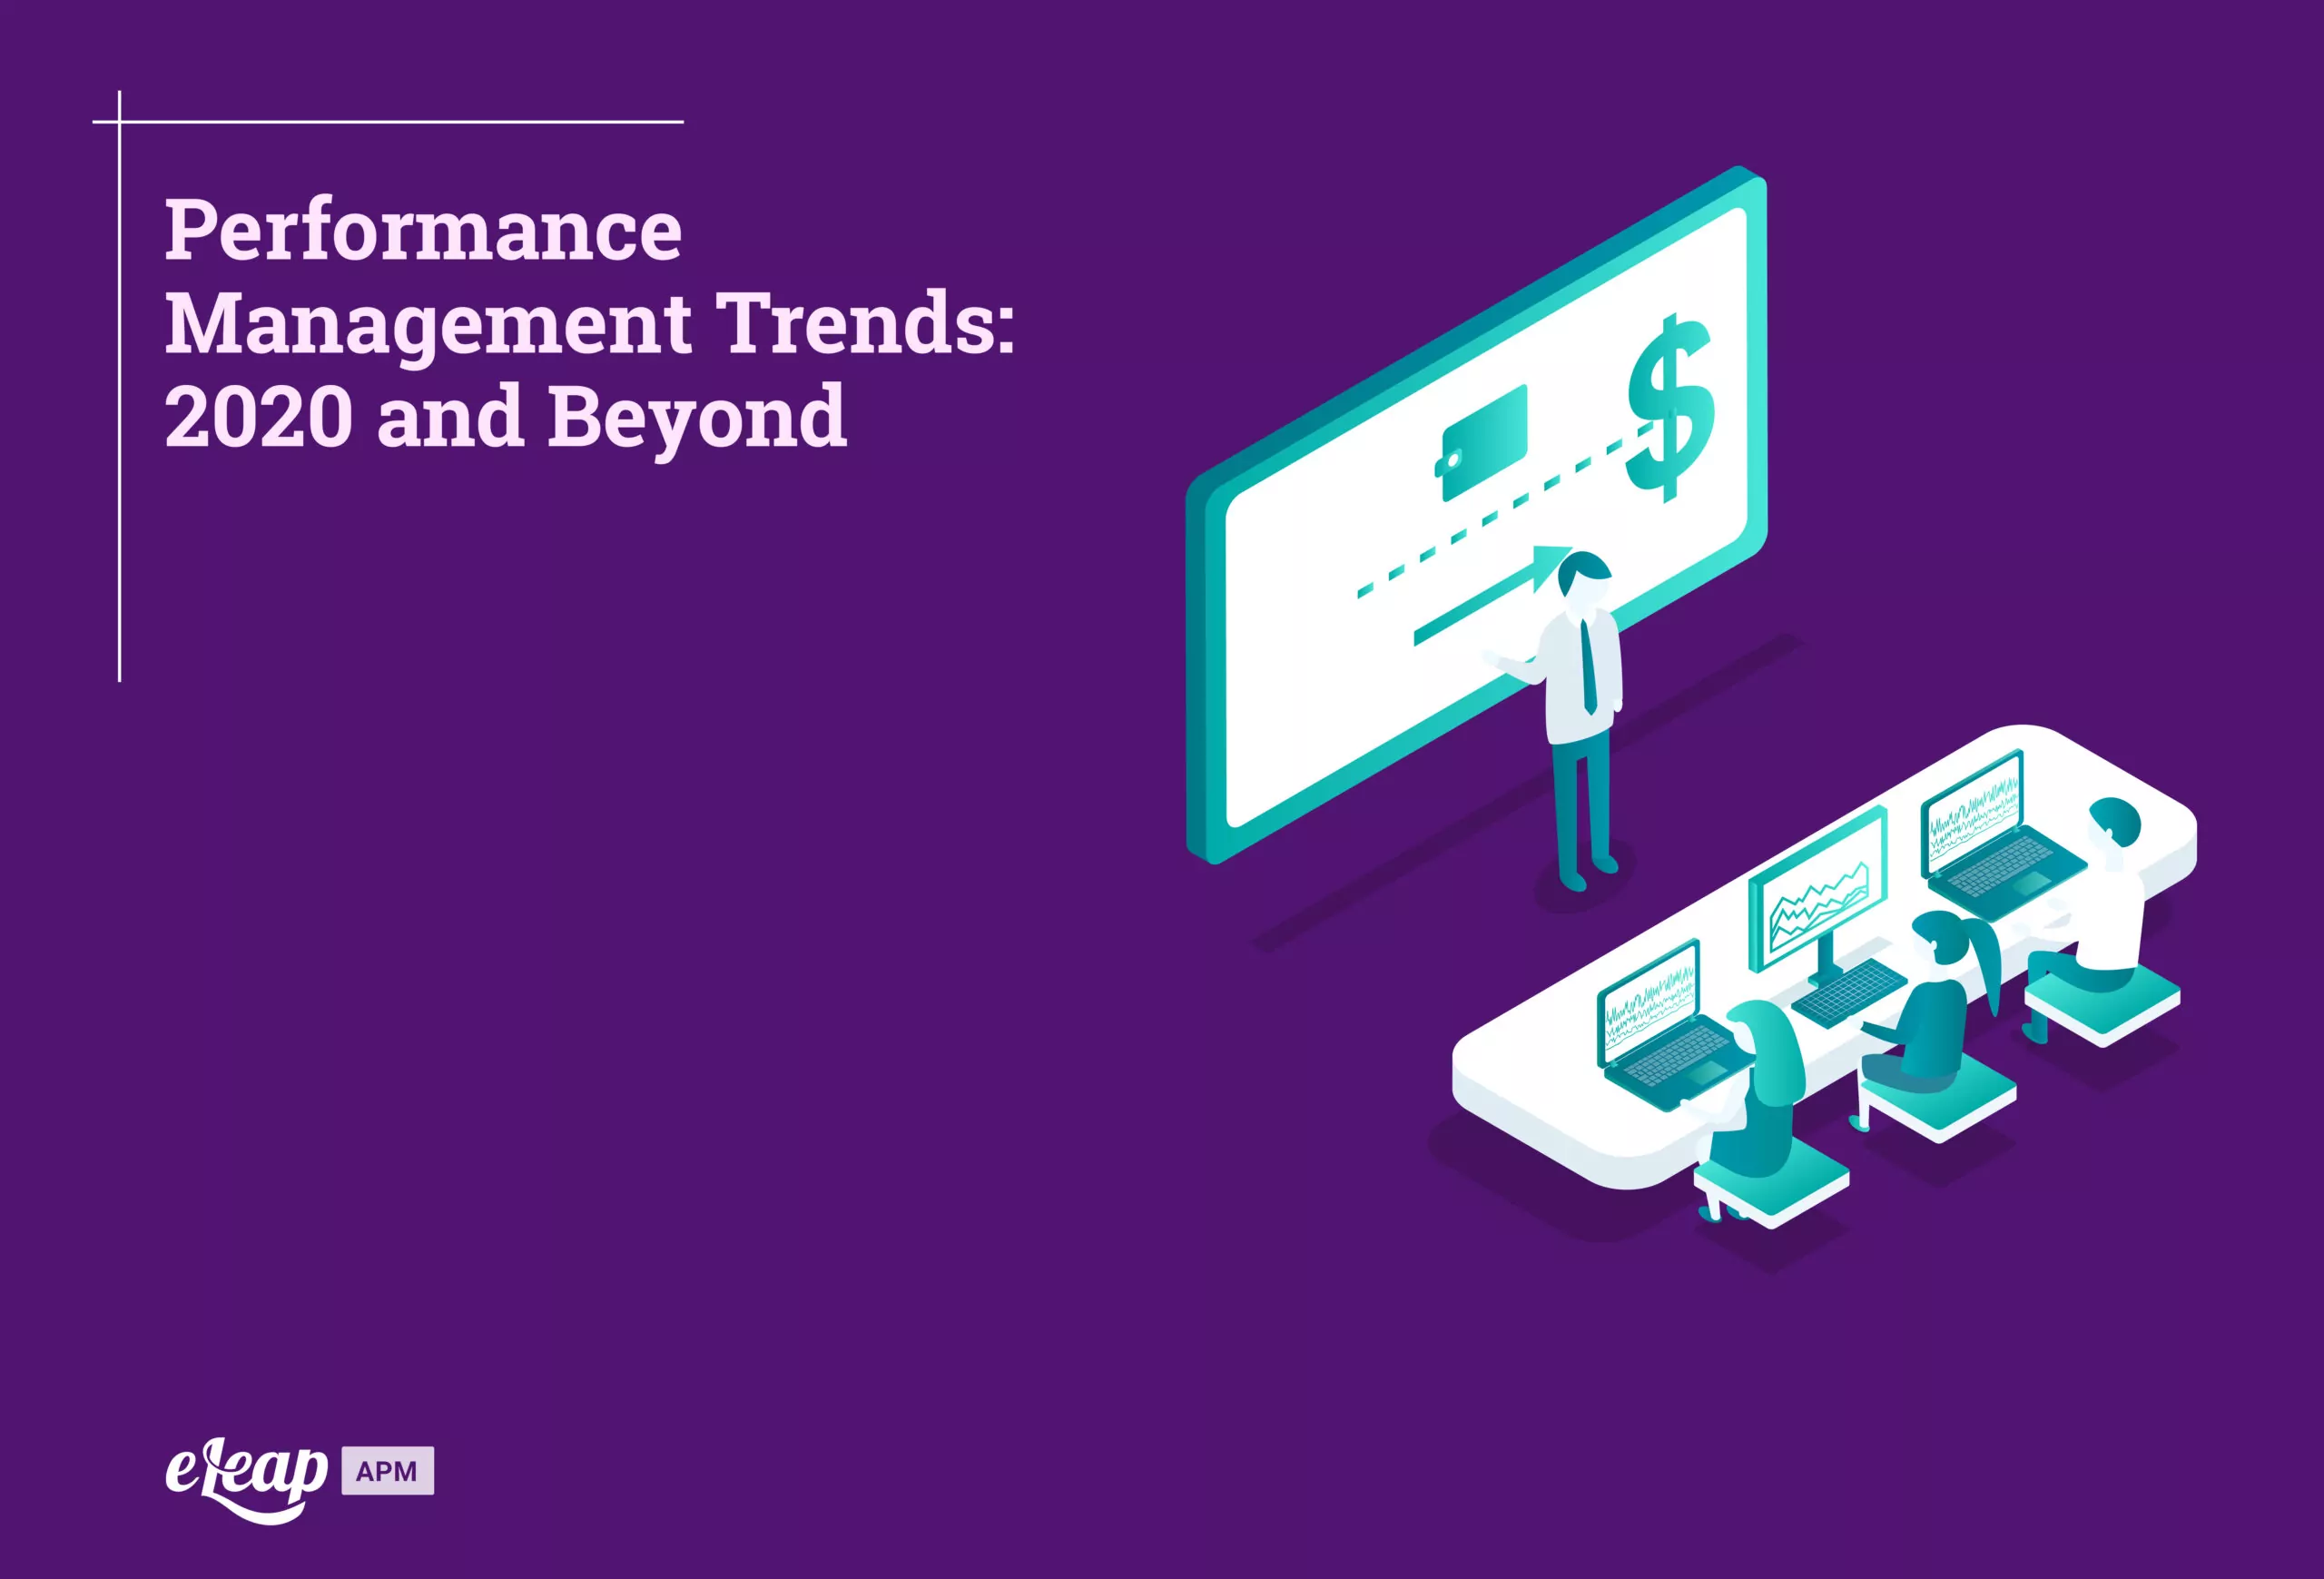 Performance Management Trends: 2020 and Beyond